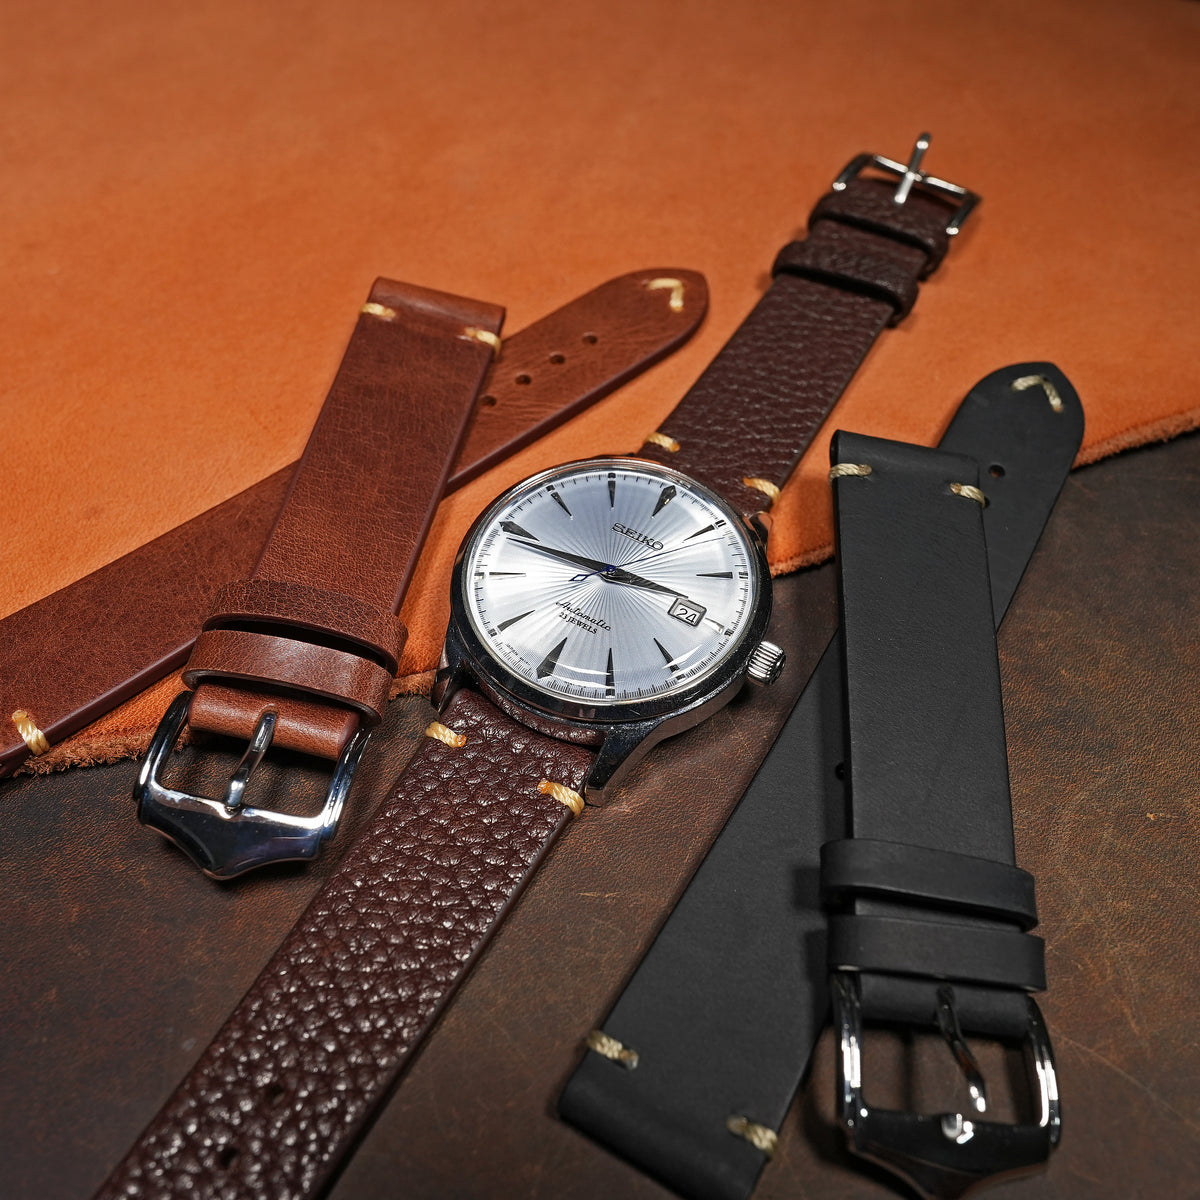 Premium Vintage Calf Leather Watch Strap in Distressed Brown